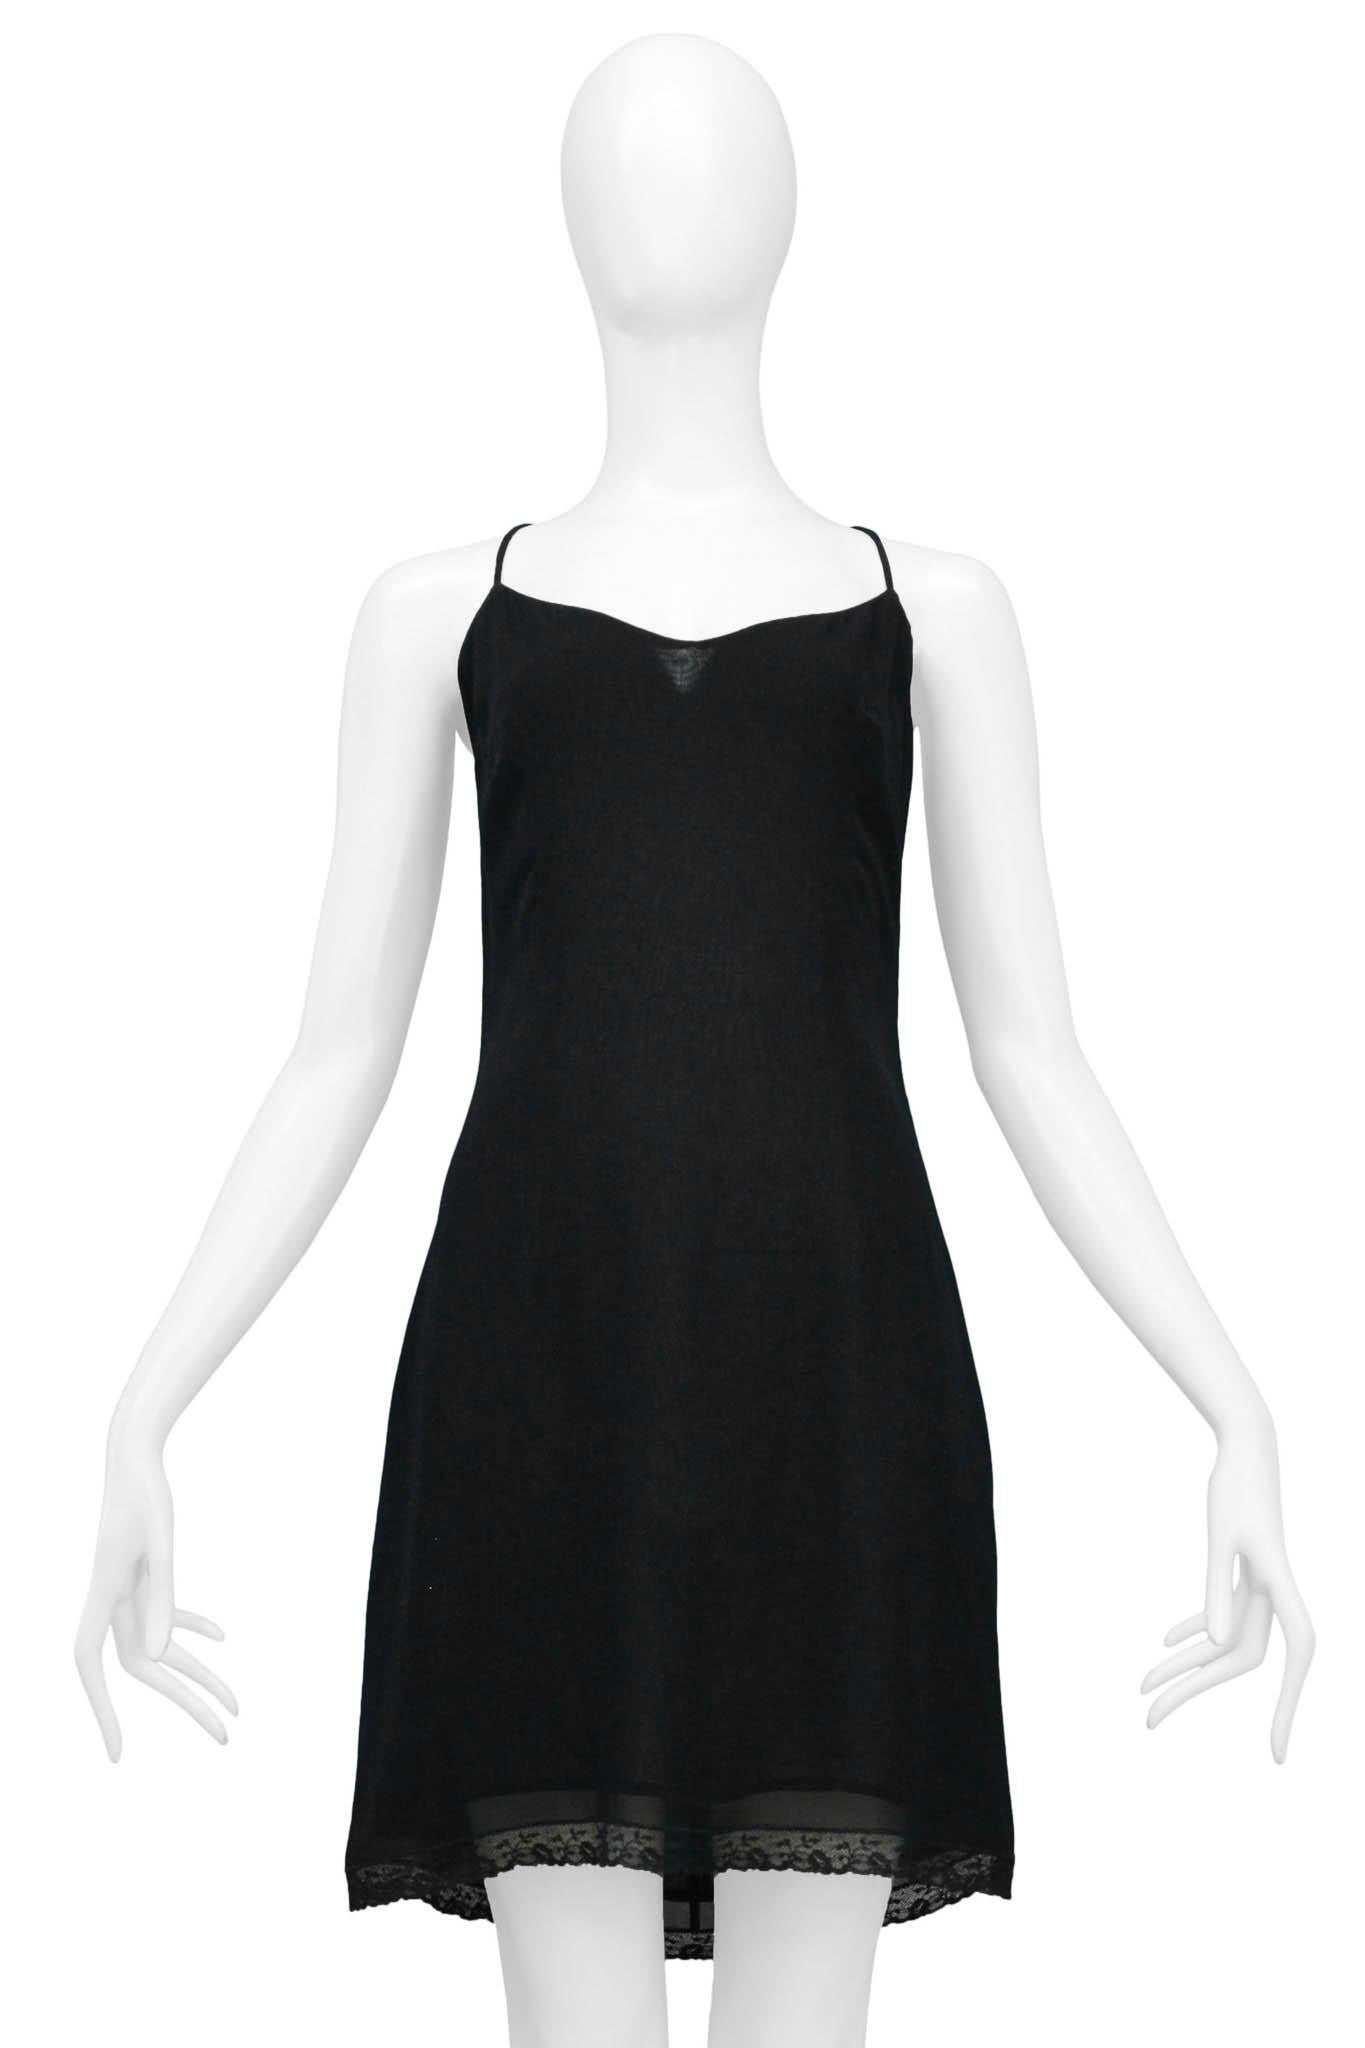 Women's or Men's Dolce & Gabbana Black Slip Dress With Lace Trim For Sale